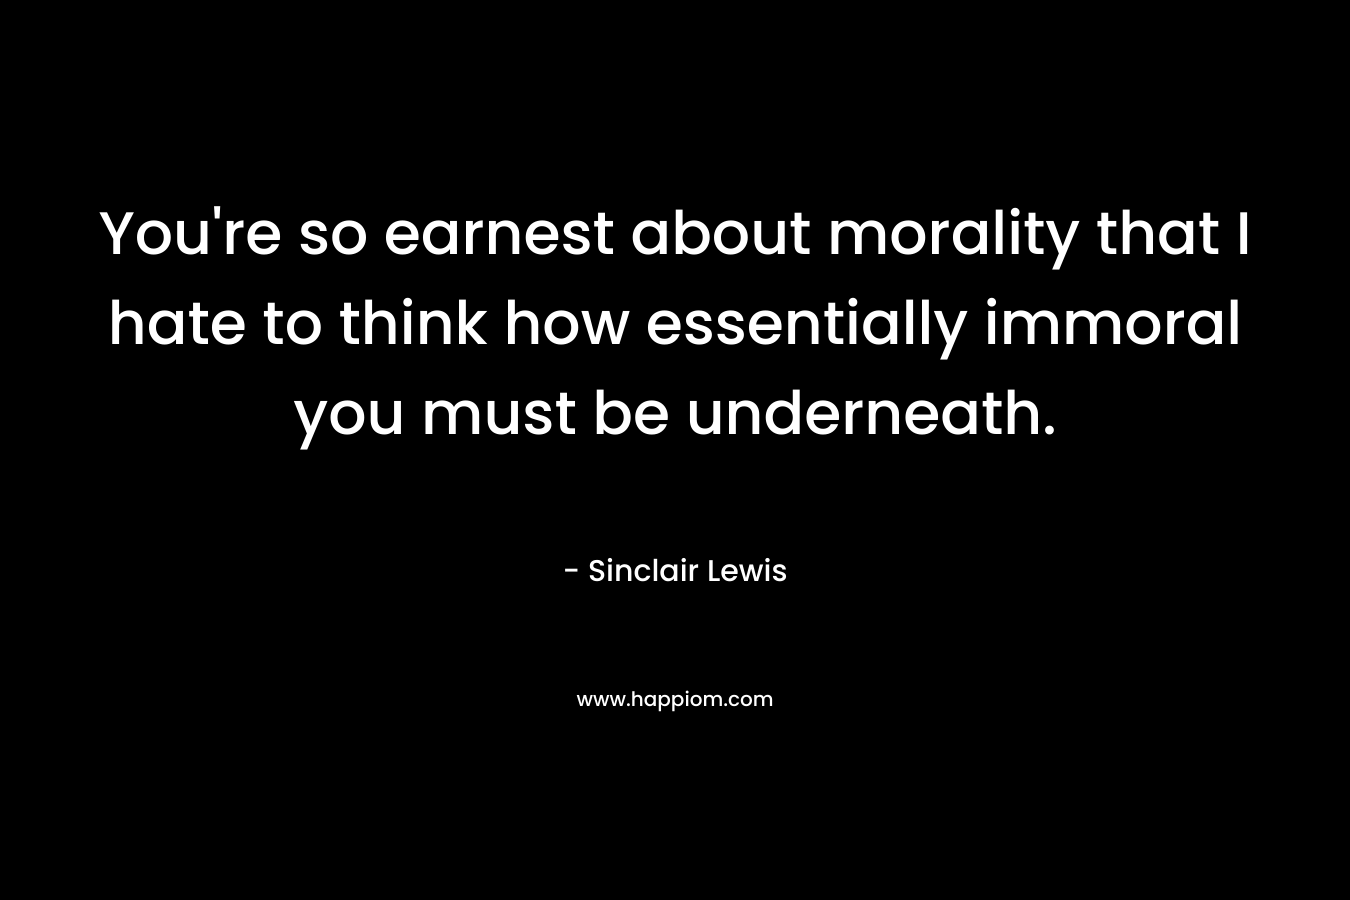 You’re so earnest about morality that I hate to think how essentially immoral you must be underneath. – Sinclair Lewis